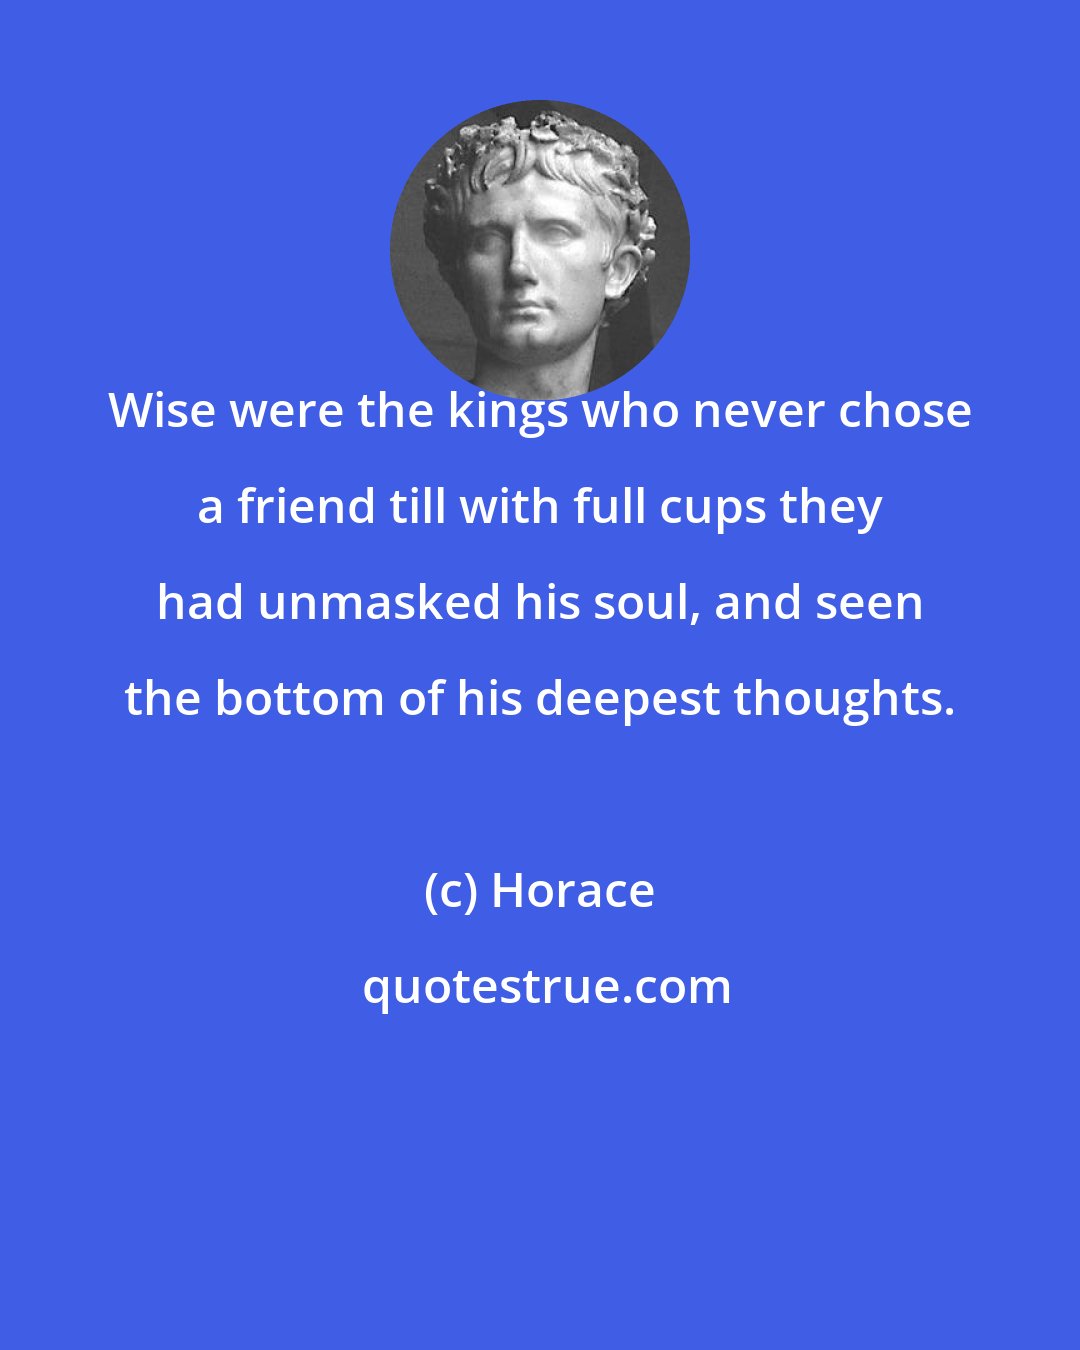 Horace: Wise were the kings who never chose a friend till with full cups they had unmasked his soul, and seen the bottom of his deepest thoughts.